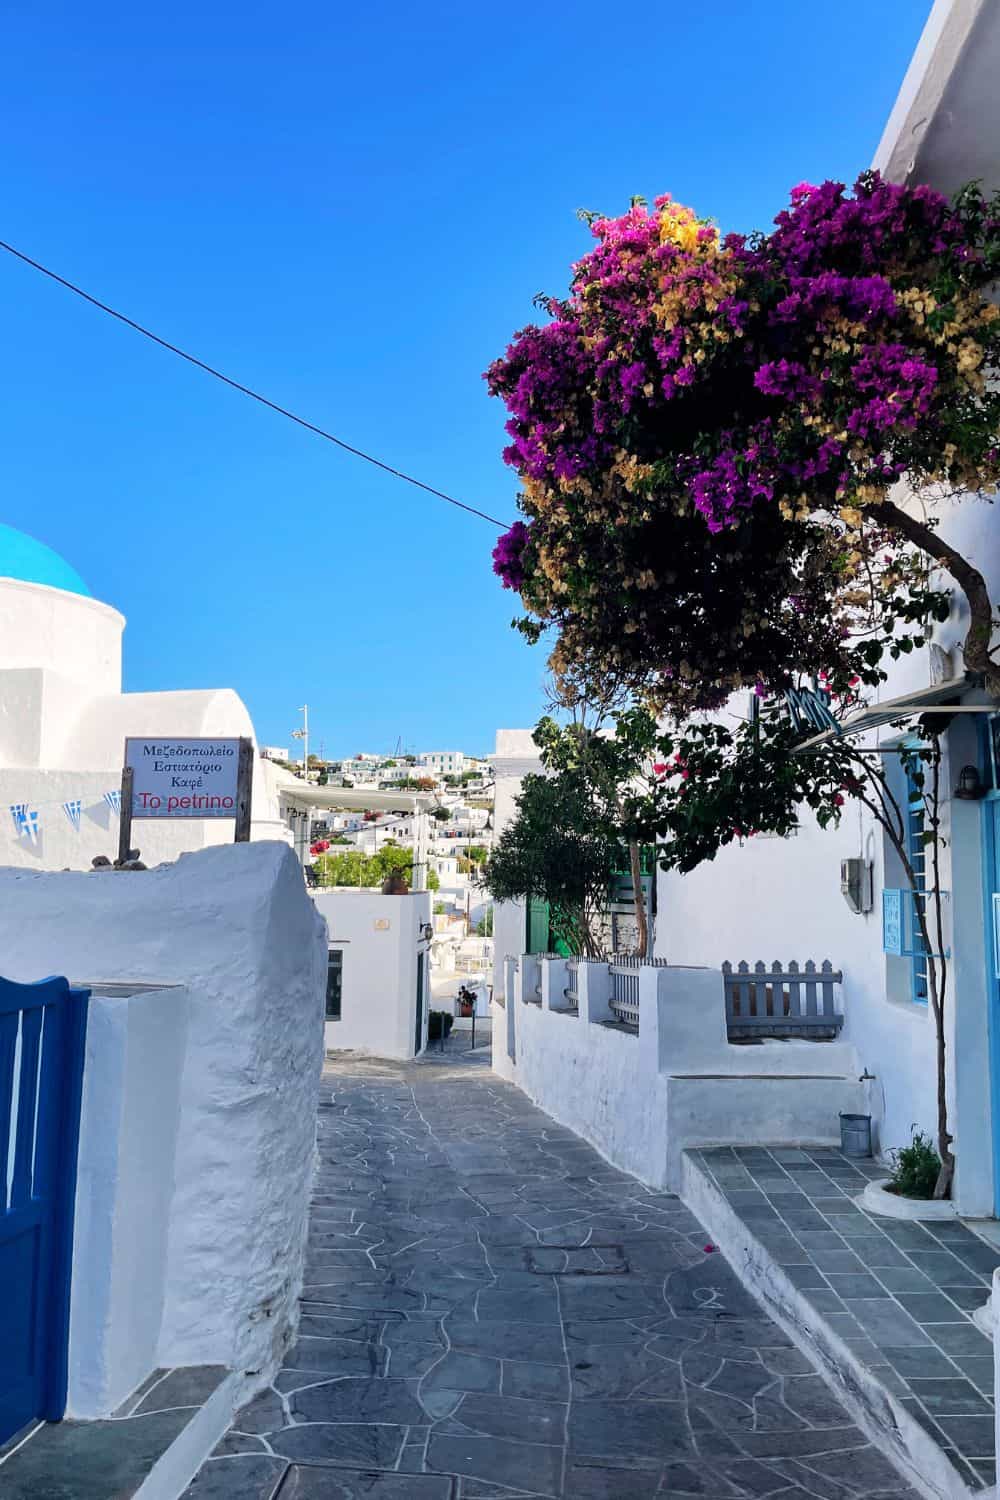 A charming street in Sifnos basks in the sunlight, lined with whitewashed buildings and a vibrant bougainvillea in full bloom. The blue dome of a church peeks out in the distance, while signs for a café add a quaint touch to this picturesque alley, inviting exploration